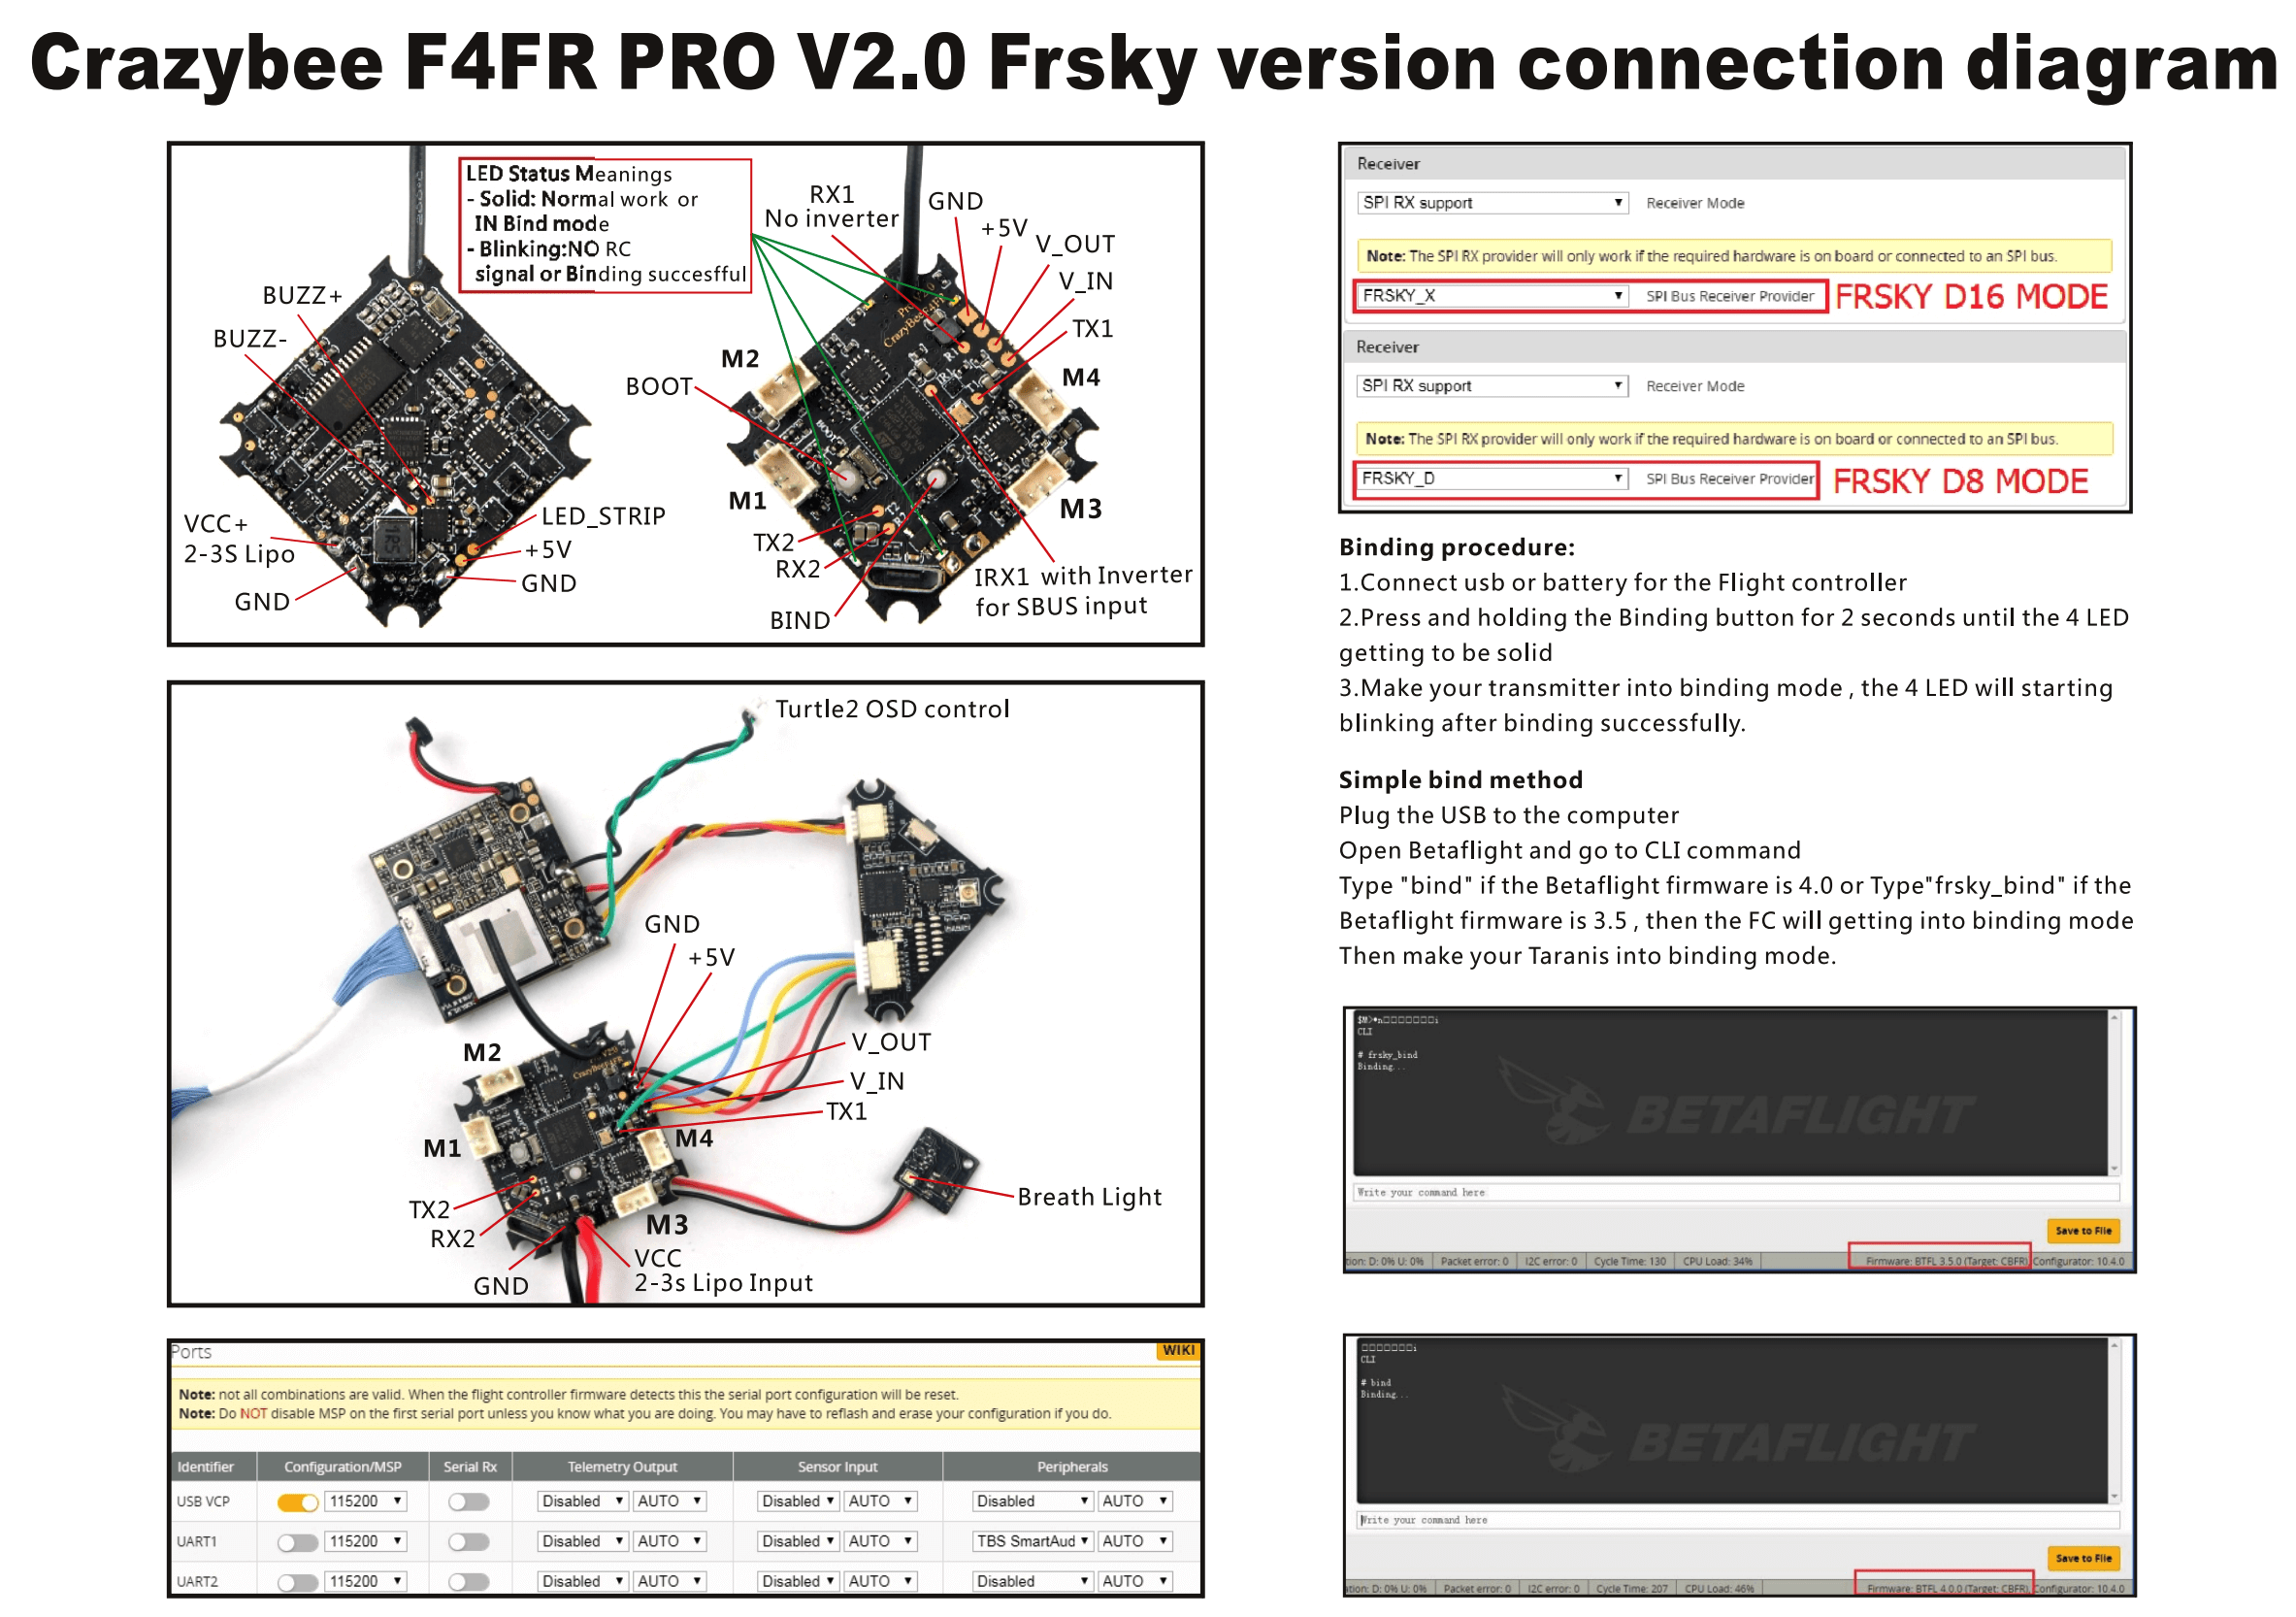 crazybee f4fr pro v2.0 wiring diagram and betaflight settings